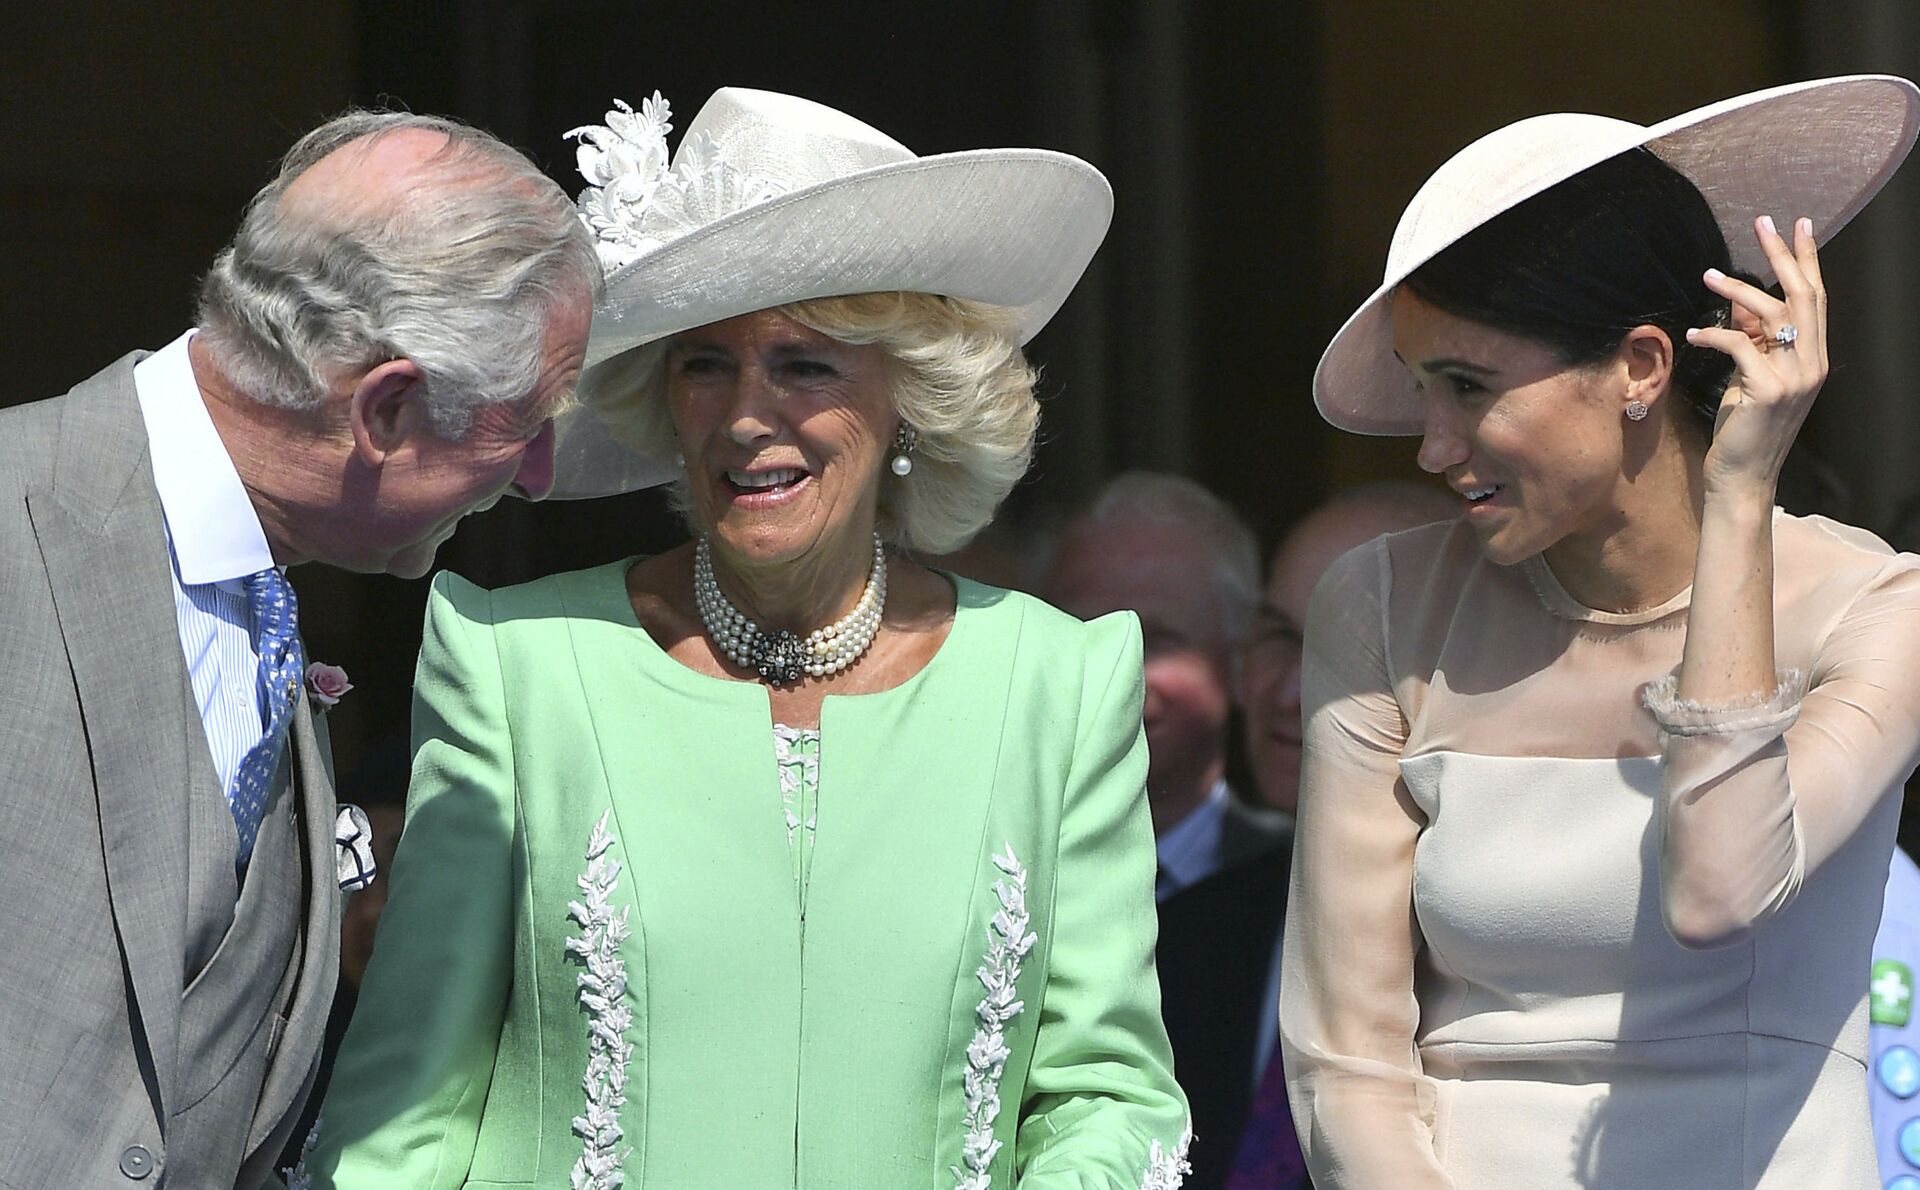 Britian's Prince Charles, left, reacts with Camilla, the Duchess of Cornwall and Meghan, the Duchess of Sussex, during a garden party at Buckingham Palace in London, Tuesday May 22, 2018. - Sputnik International, 1920, 07.09.2021